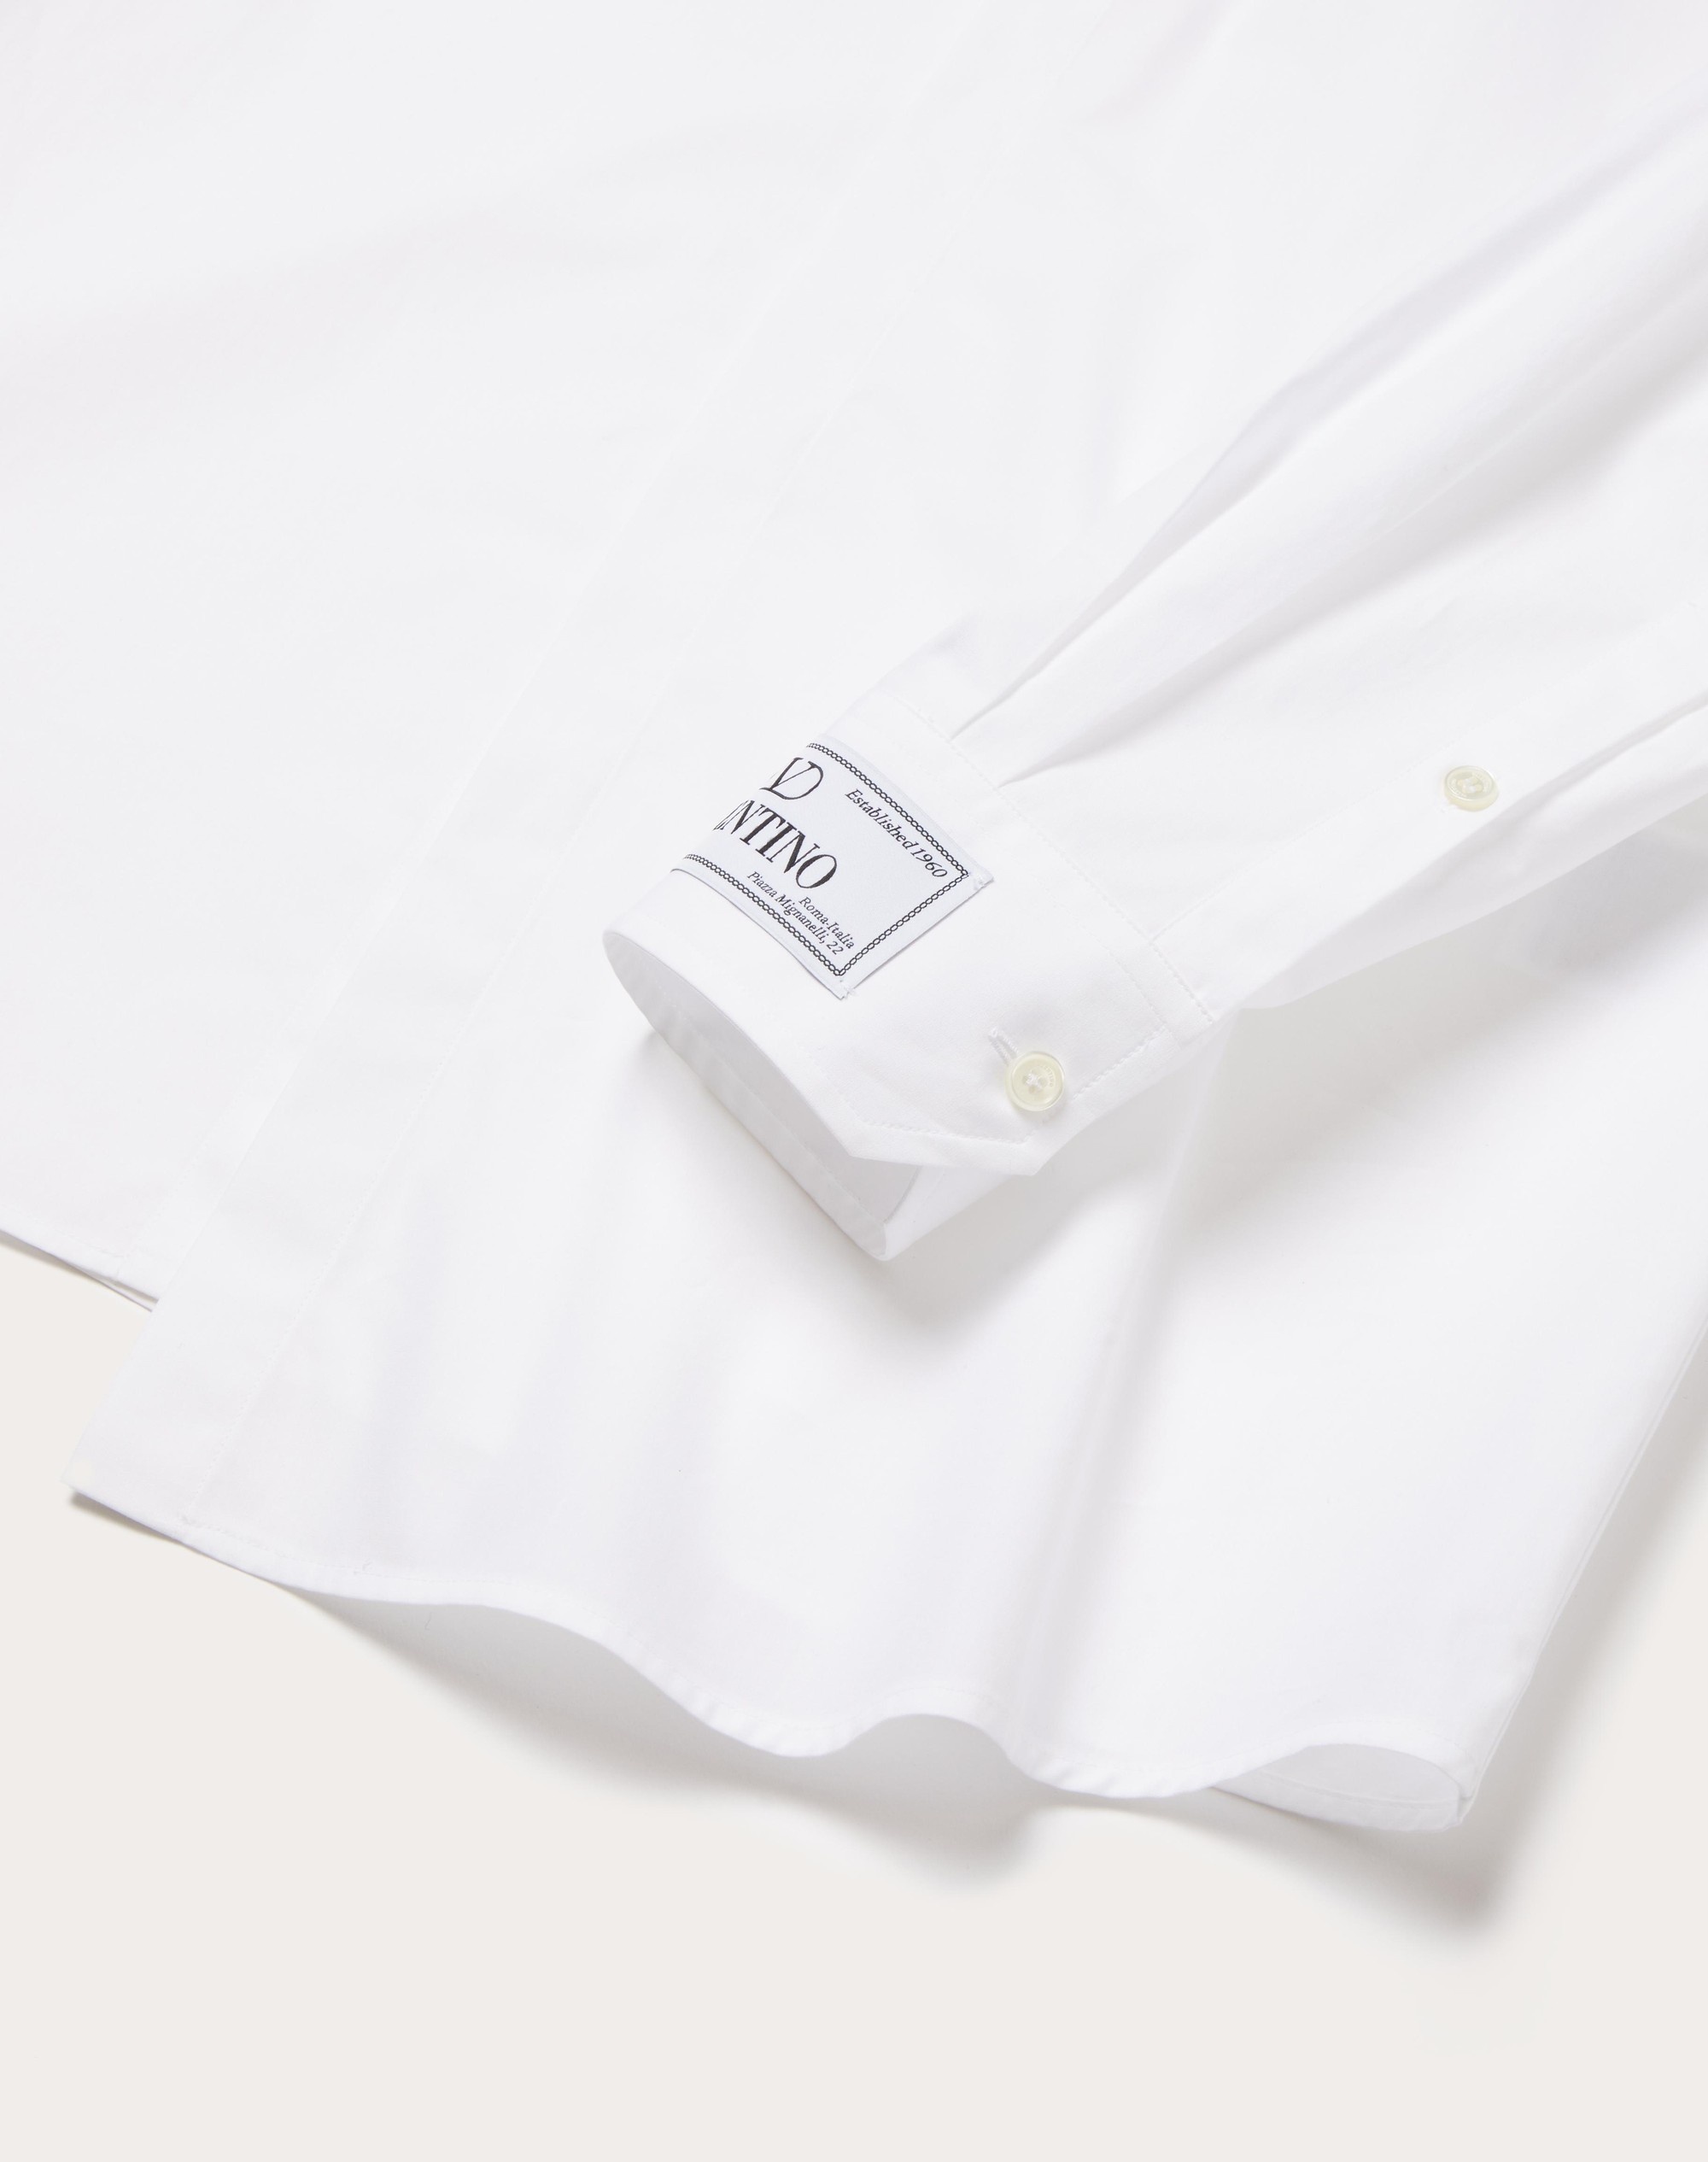 LONG SLEEVE COTTON SHIRT WITH MAISON VALENTINO TAILORING LABEL - 3